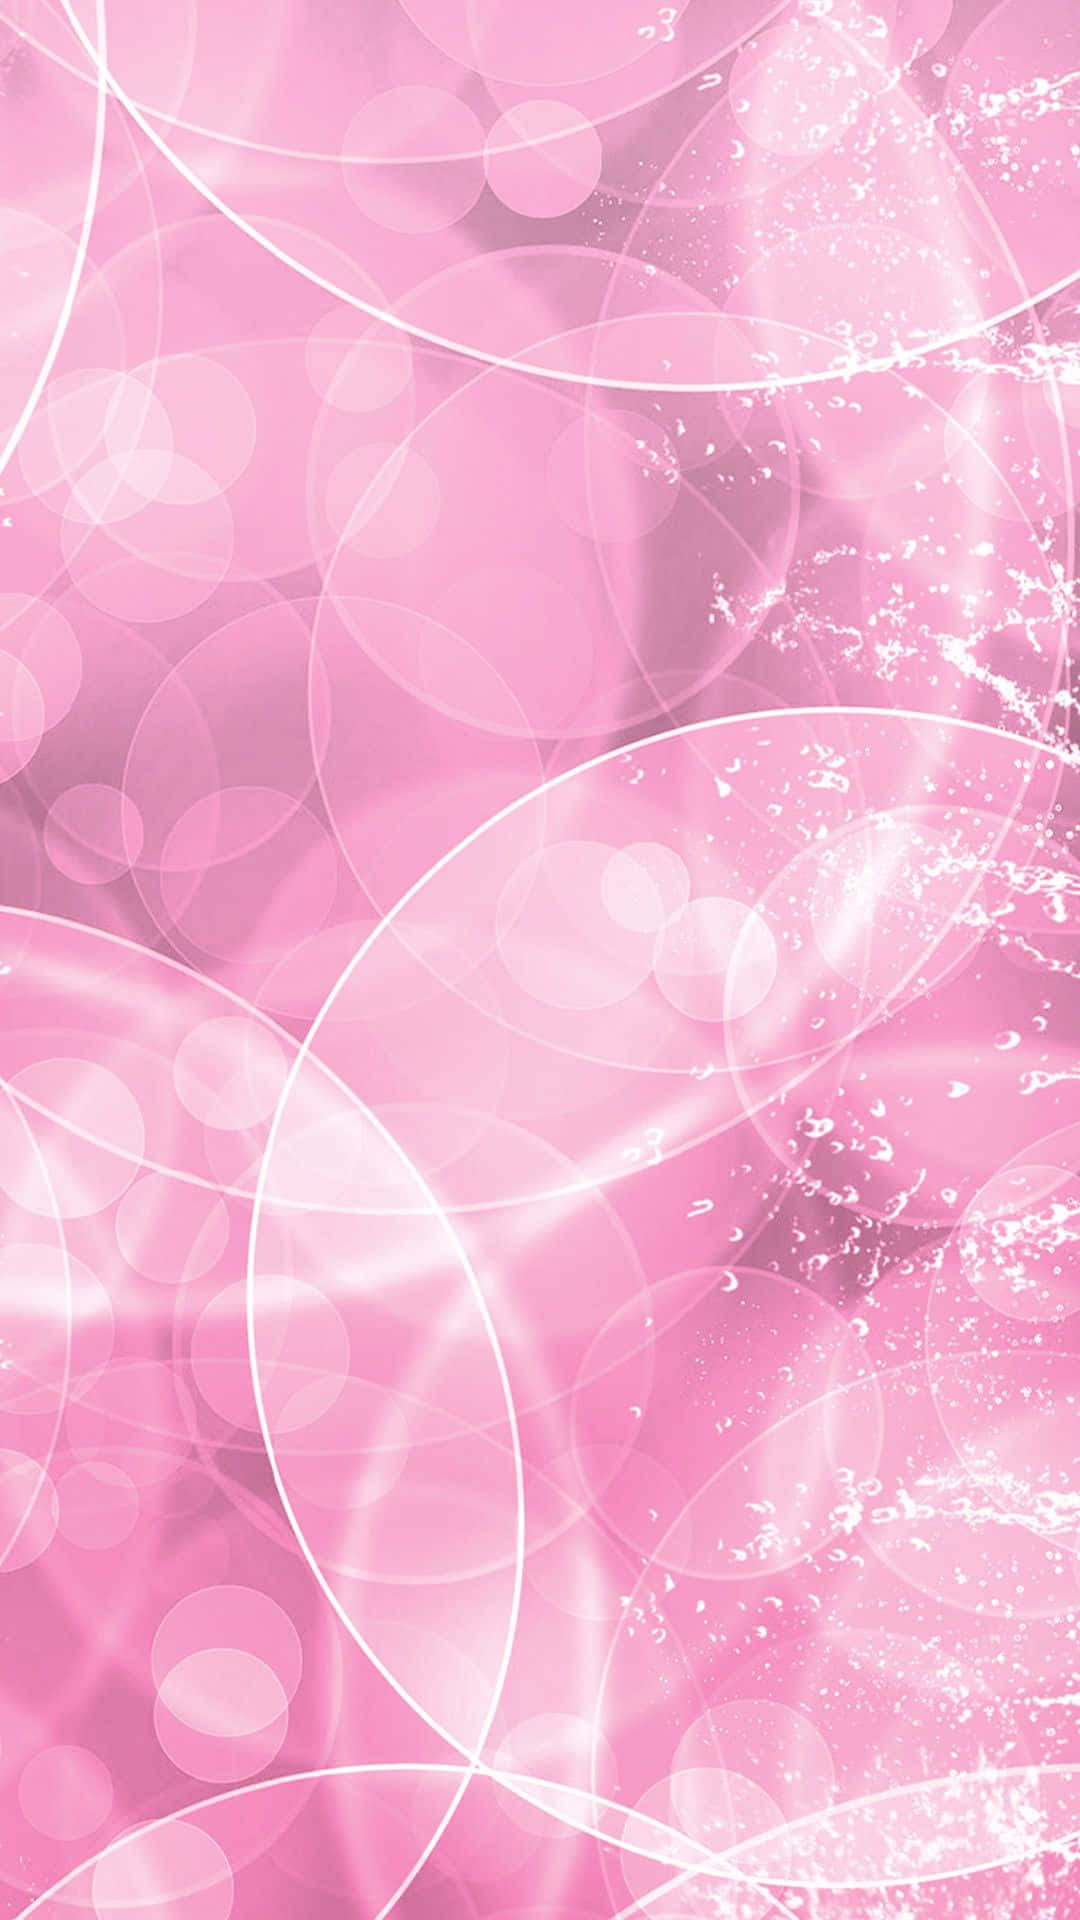 A Pink Background With A White Circle